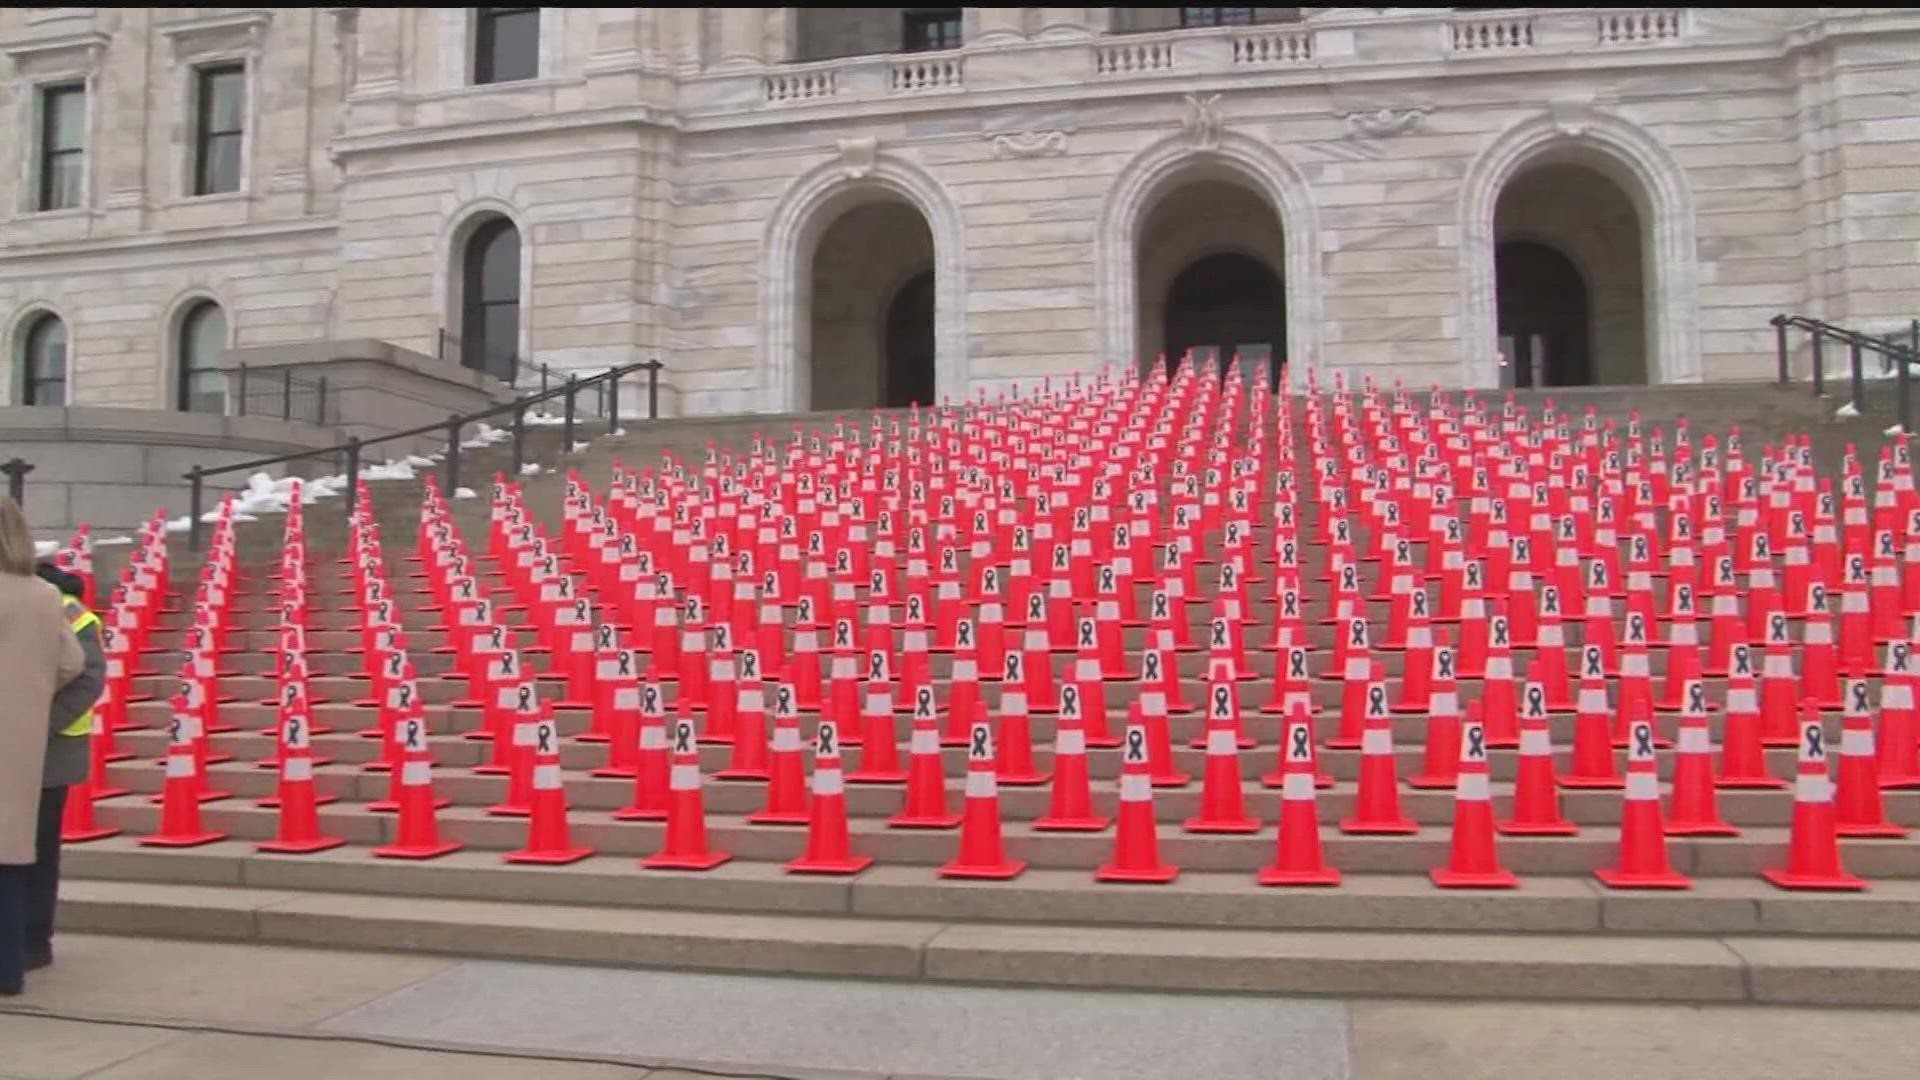 502 traffic cones lined the capitol steps to signify those who died on Minnesota roads in 2021.